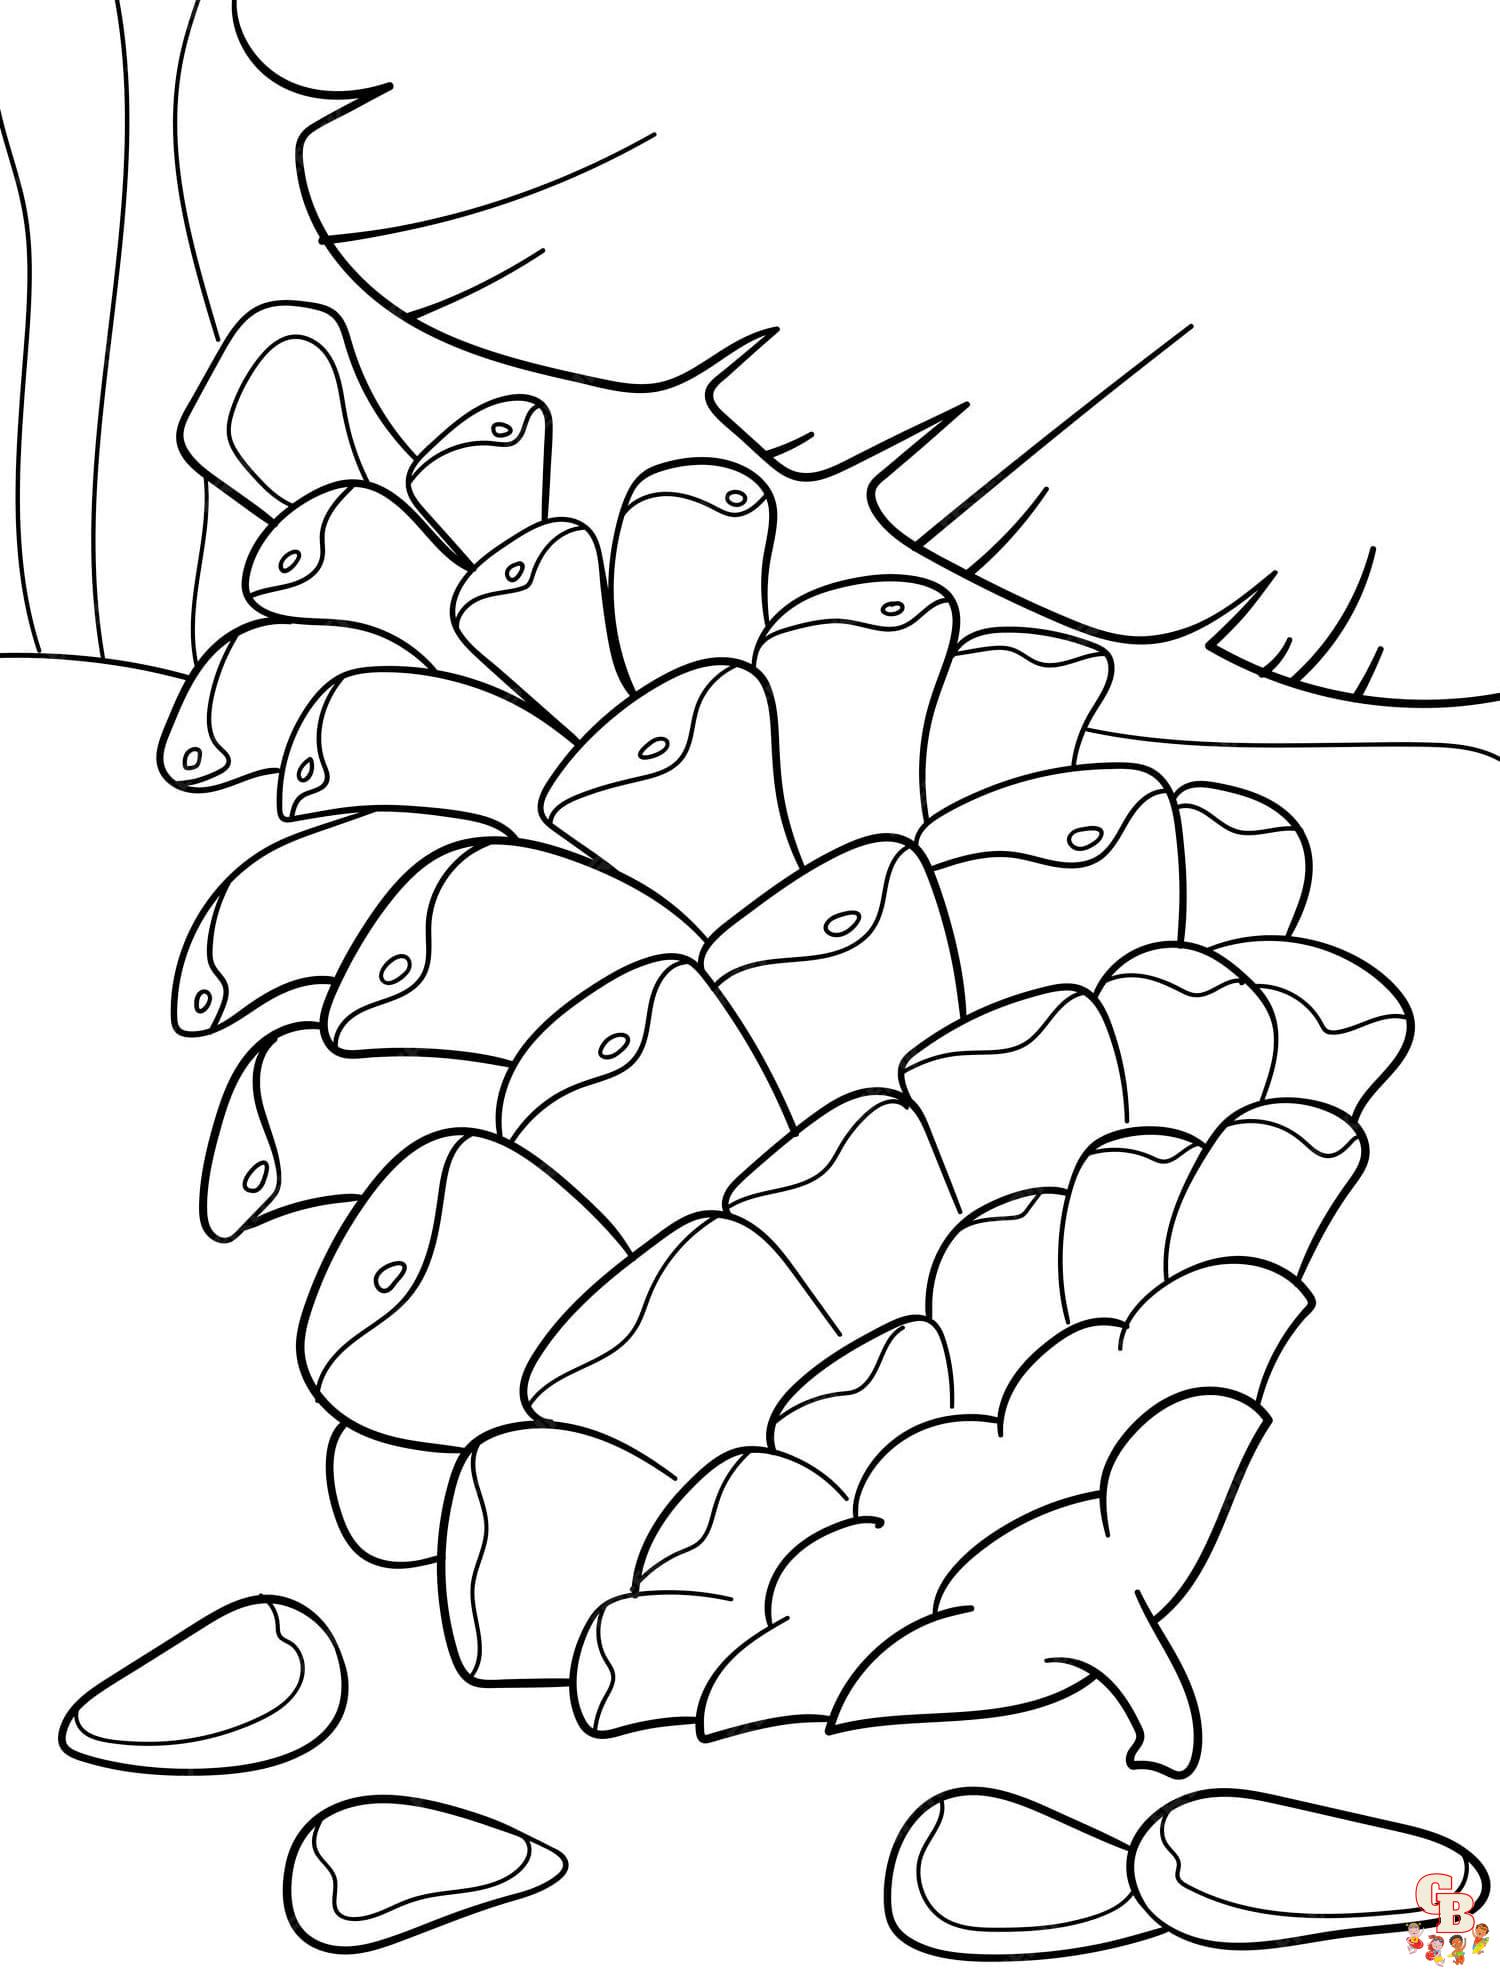 Pine Cone Coloring Pages